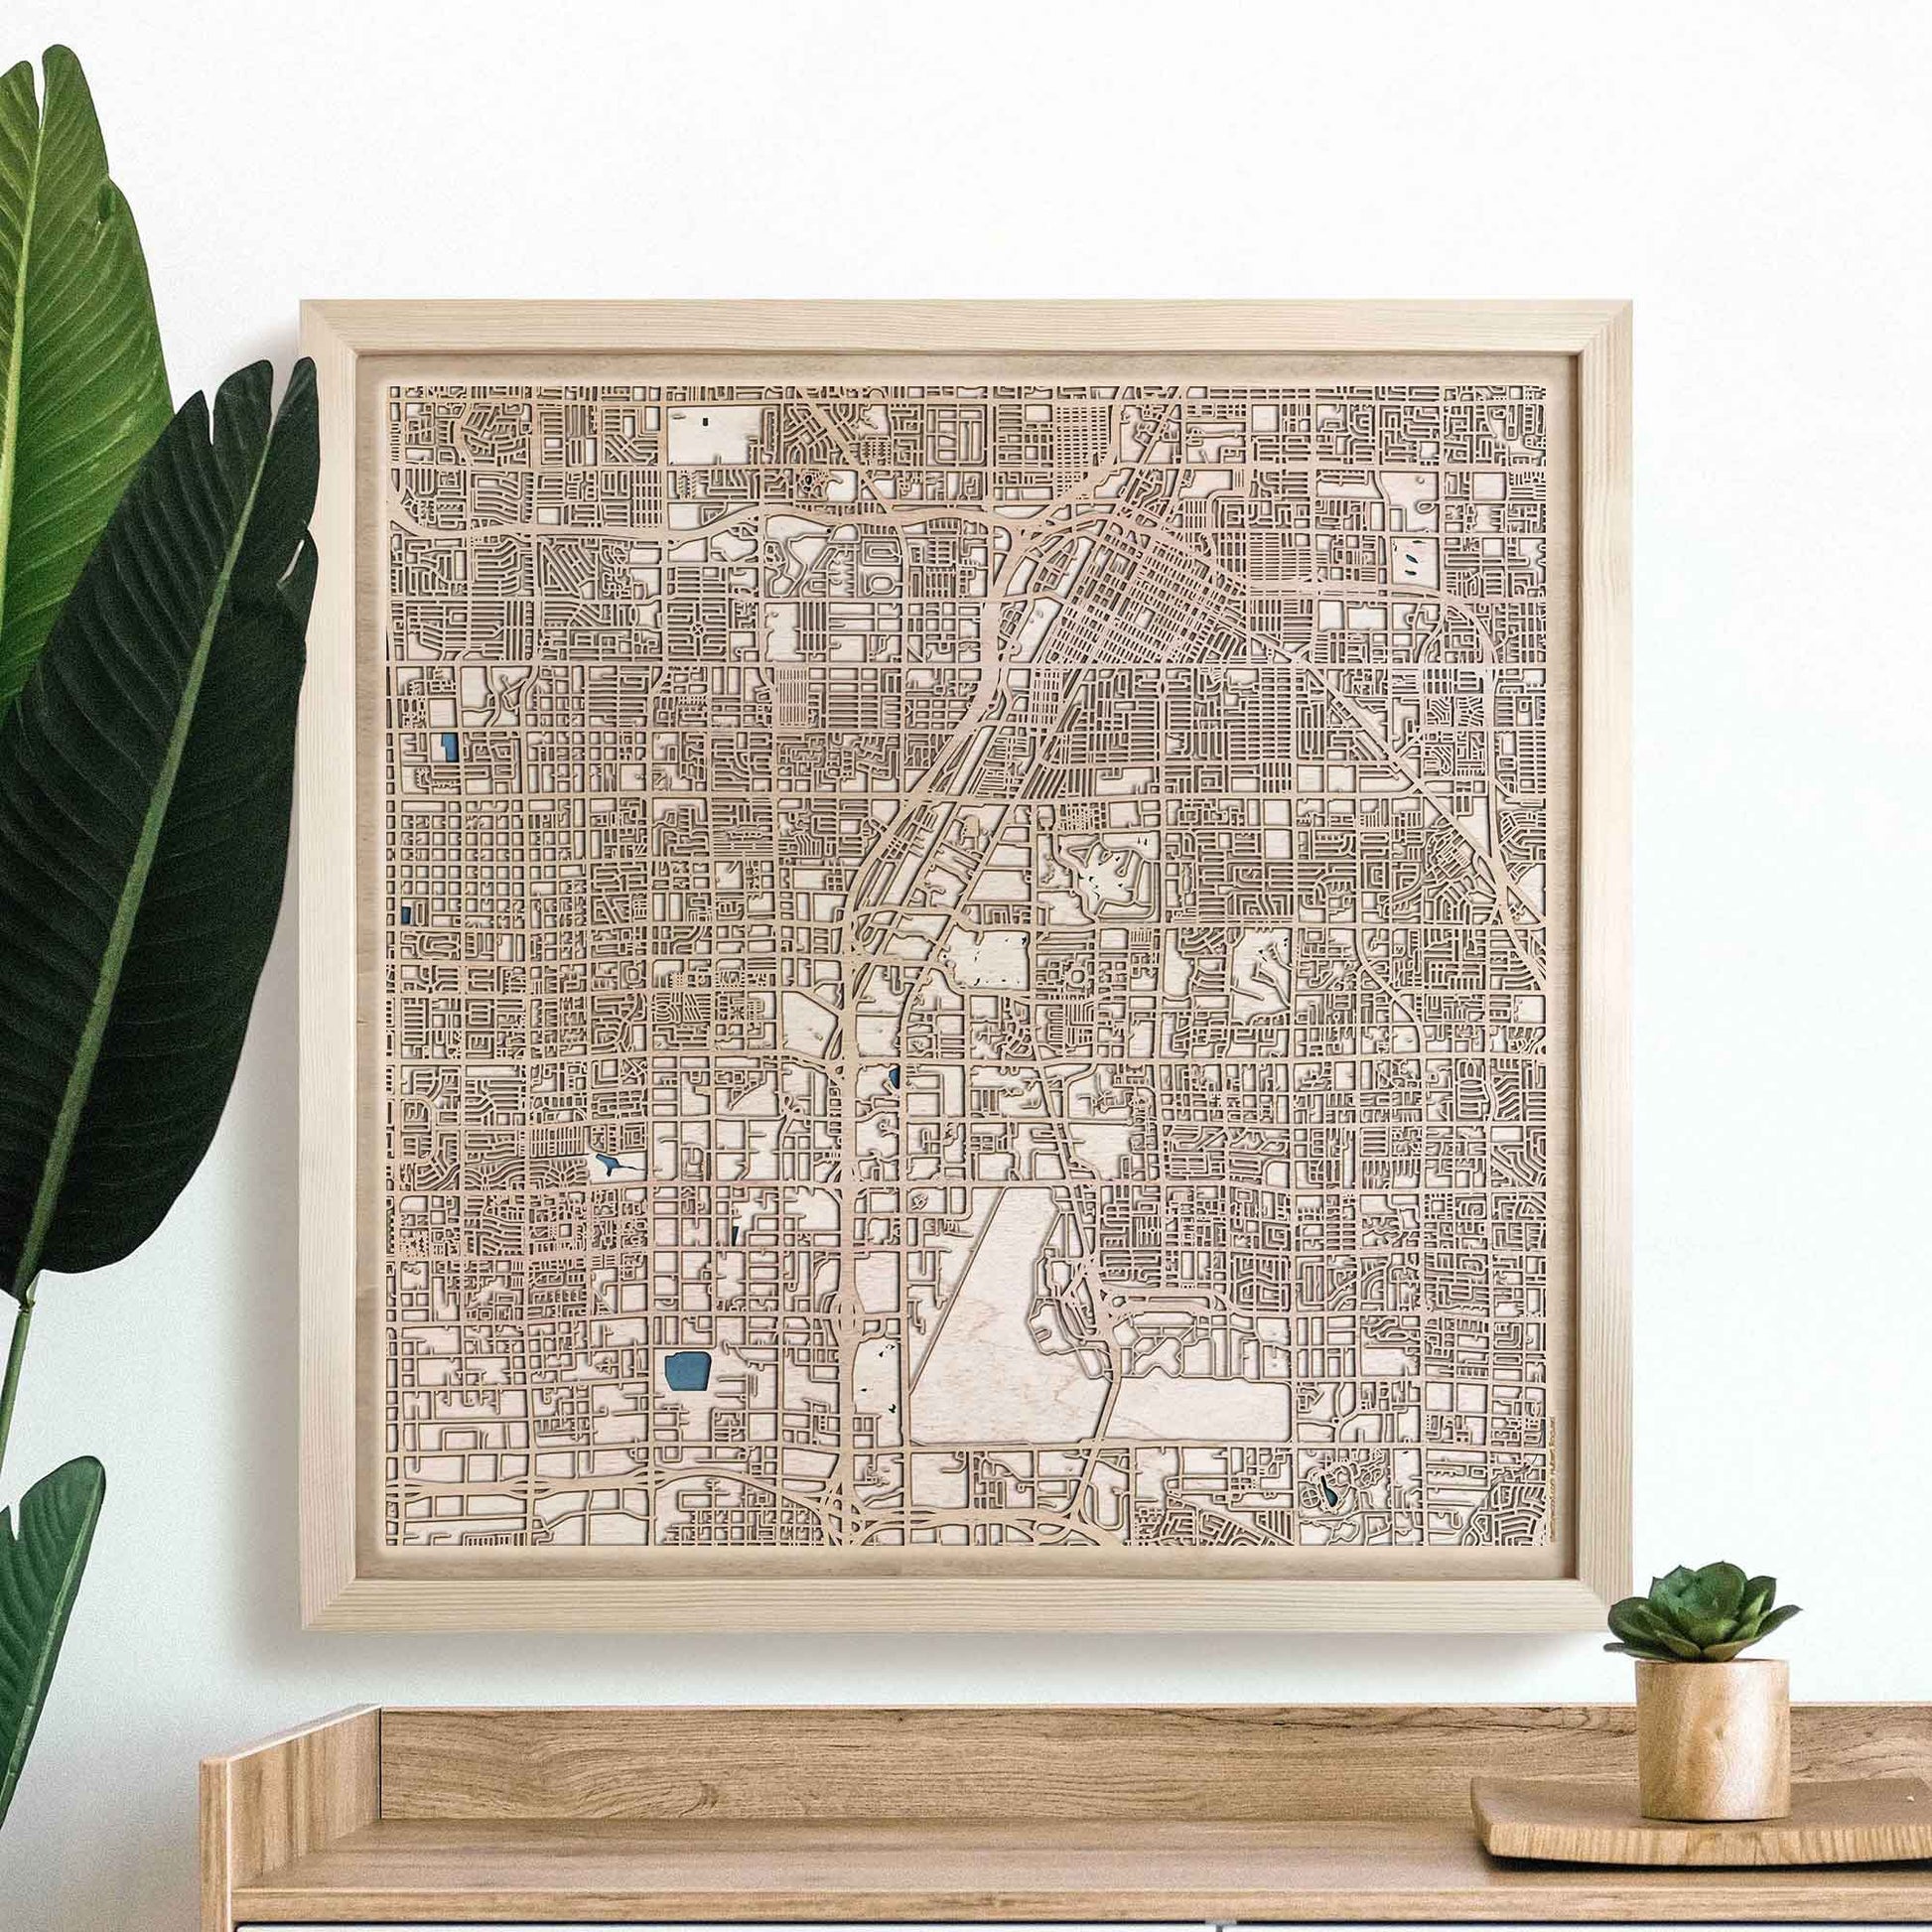 Las Vegas Wooden Map by CityWood - Custom Wood Map Art - Unique Laser Cut Engraved - Anniversary Gift